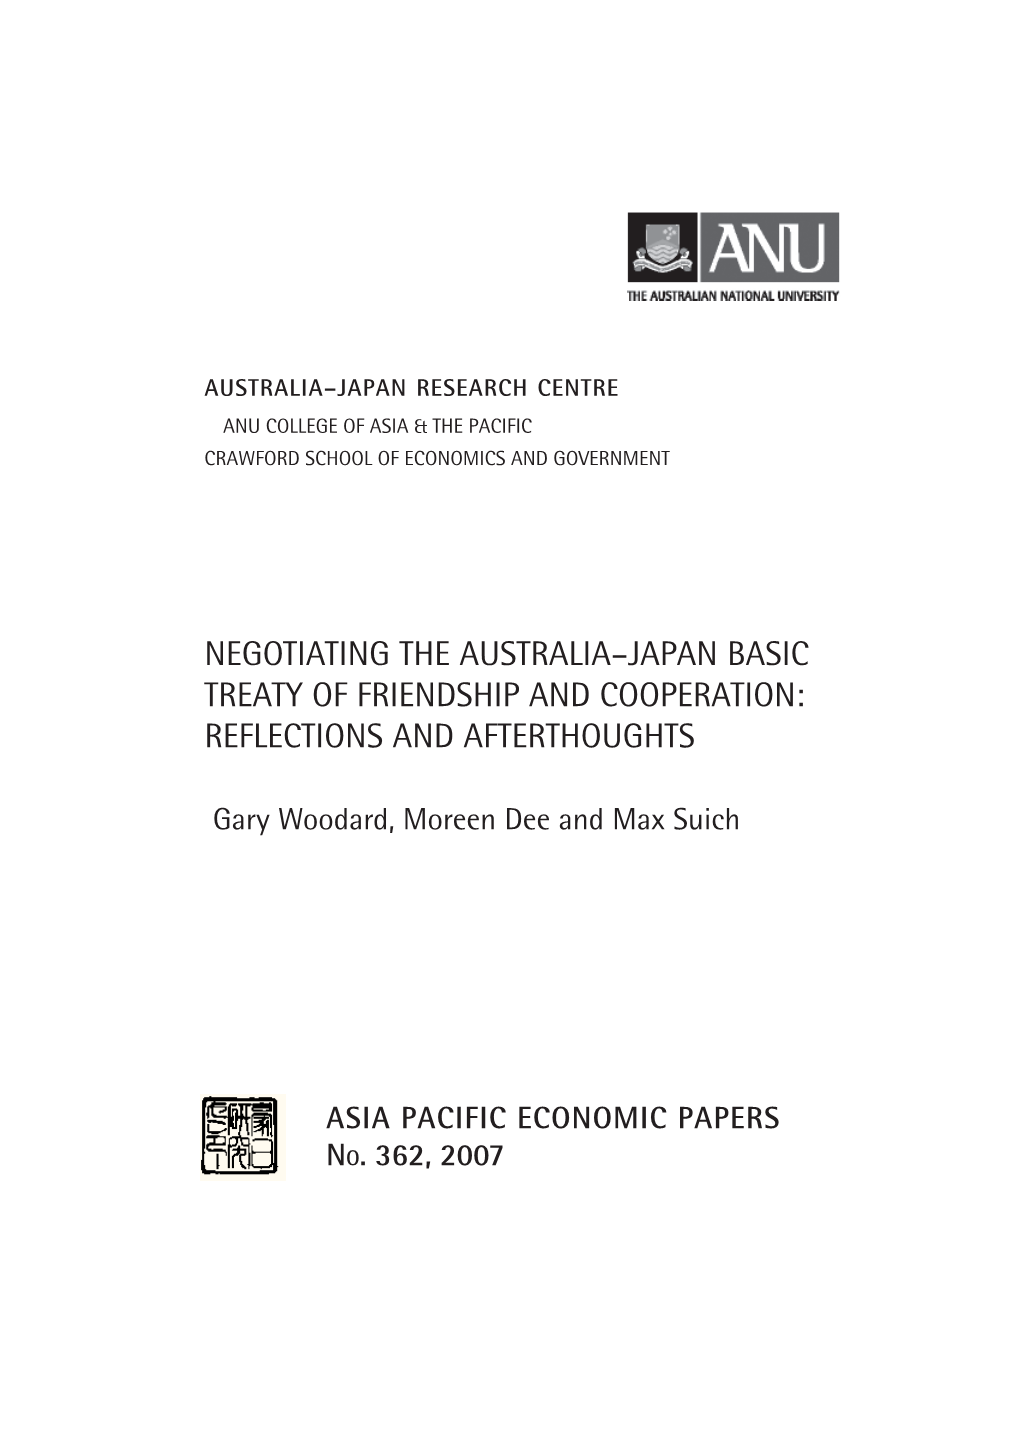 Negotiating the Australia–Japan Basic Treaty of Friendship and Cooperation: Reflections and Afterthoughts